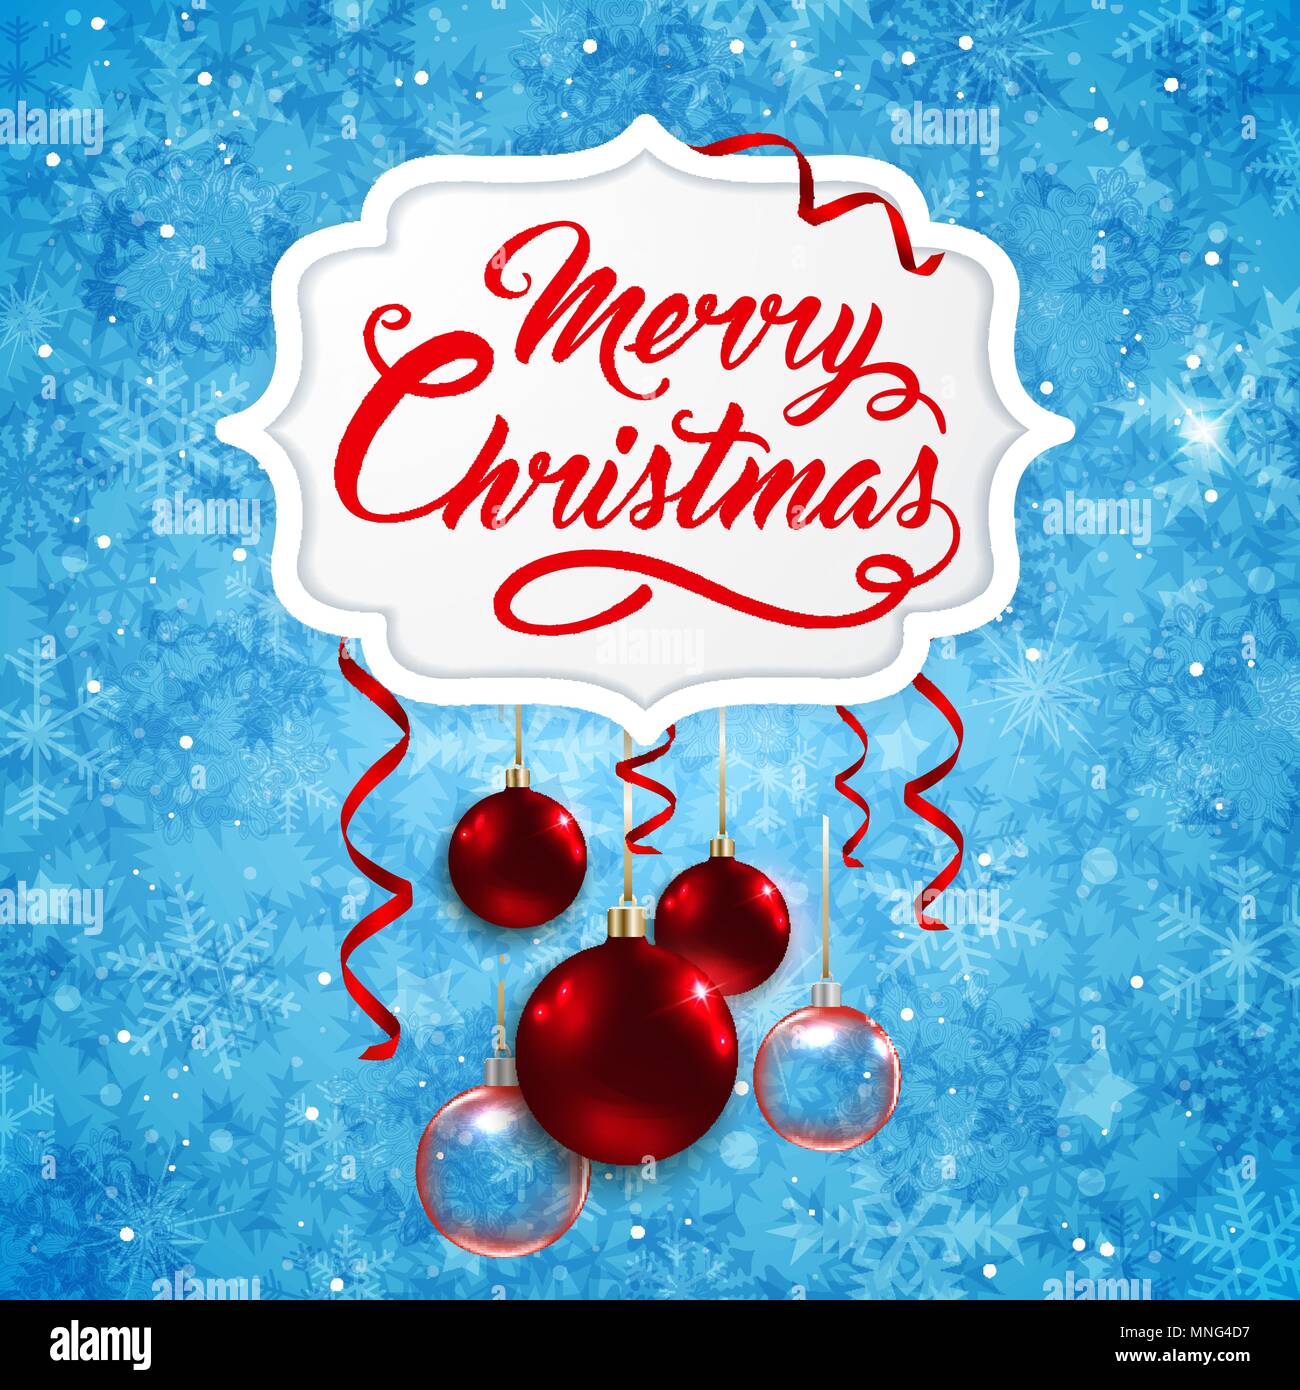 Vector Christmas banner with red baubles and greeting inscription on a blue background. Merry Christmas lettering Stock Vector